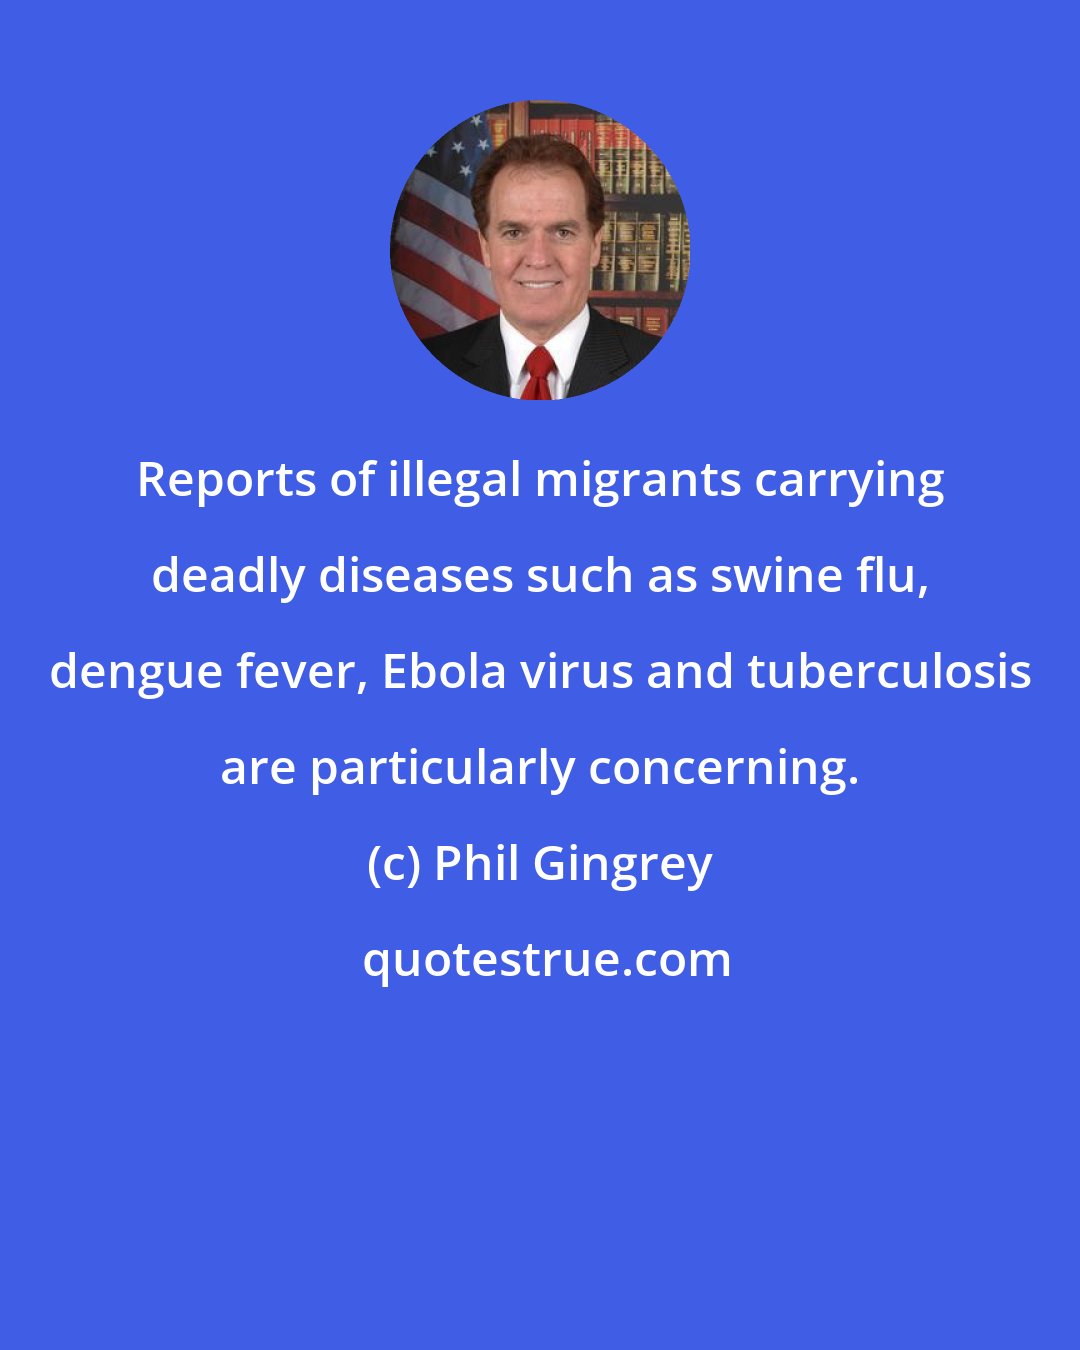 Phil Gingrey: Reports of illegal migrants carrying deadly diseases such as swine flu, dengue fever, Ebola virus and tuberculosis are particularly concerning.